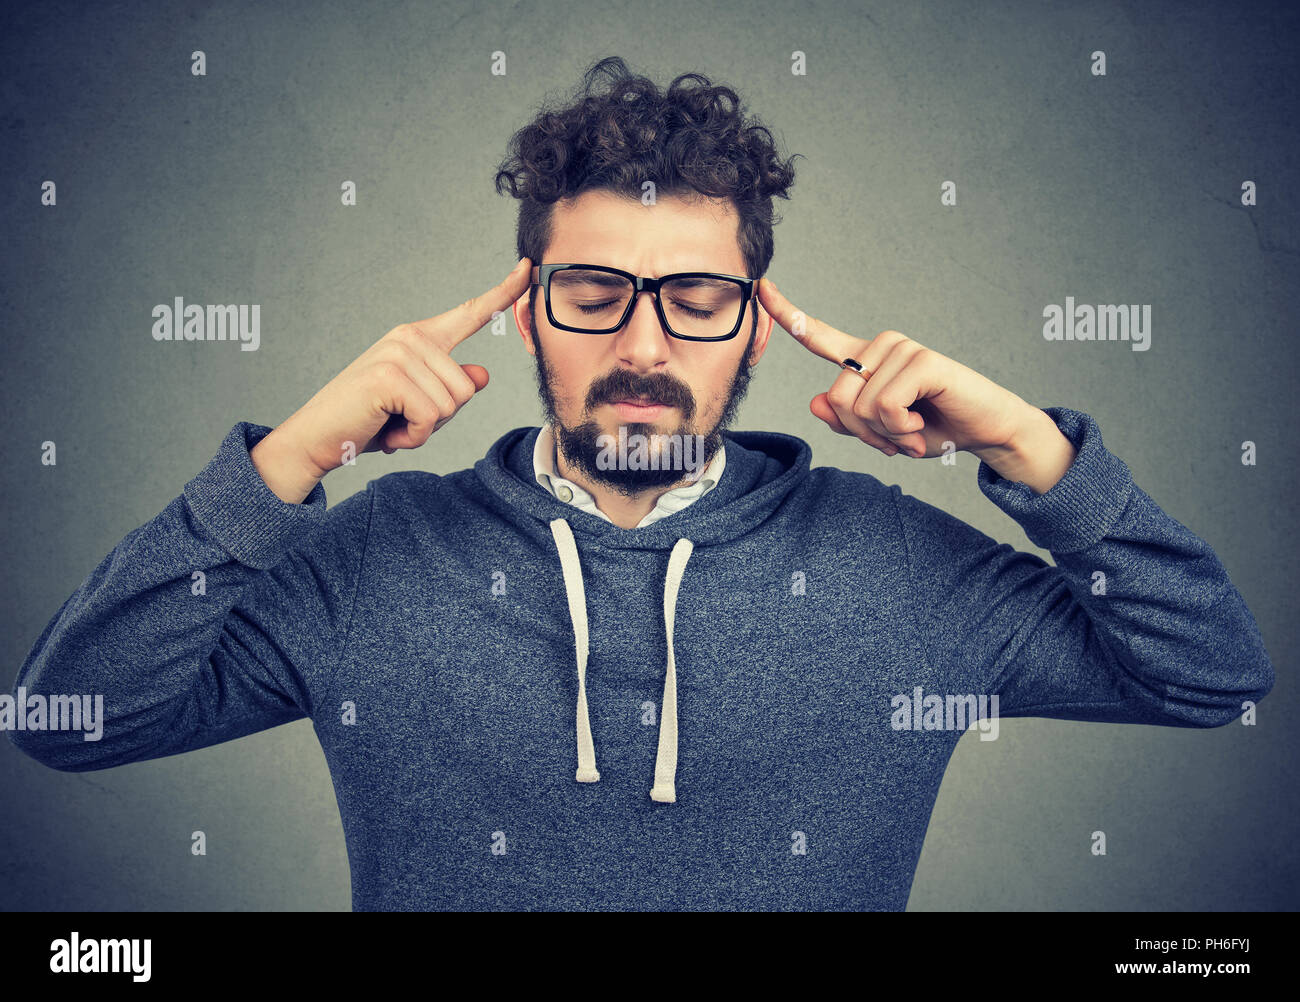 Adult man in glasses holding fingers on temples trying to concentrate on decision making Stock Photo